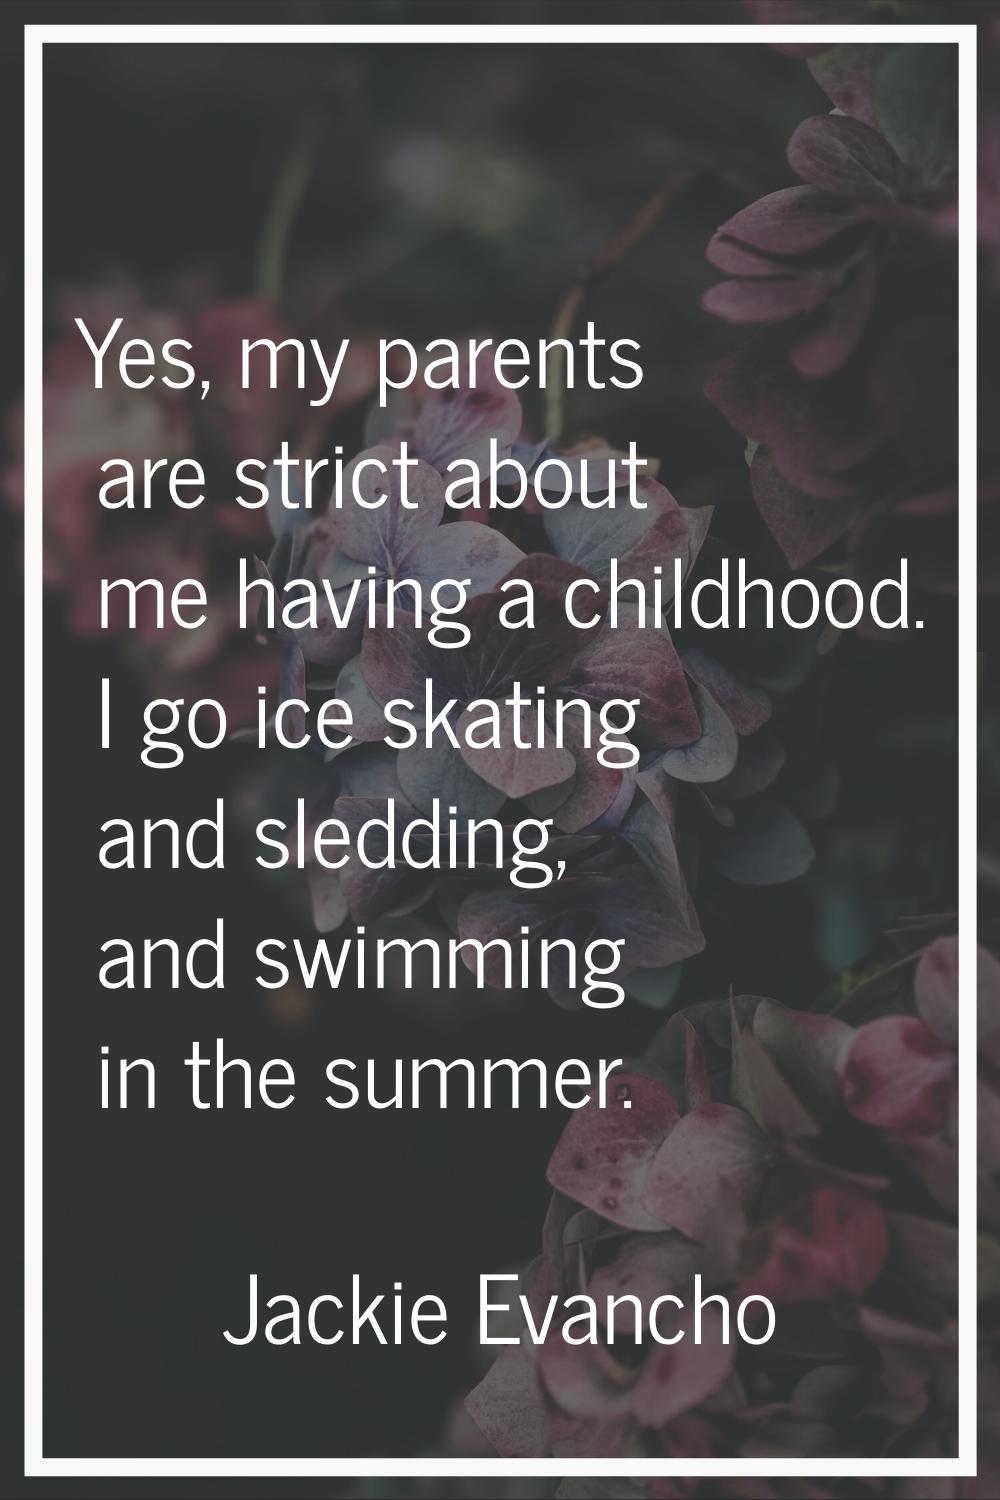 Yes, my parents are strict about me having a childhood. I go ice skating and sledding, and swimming